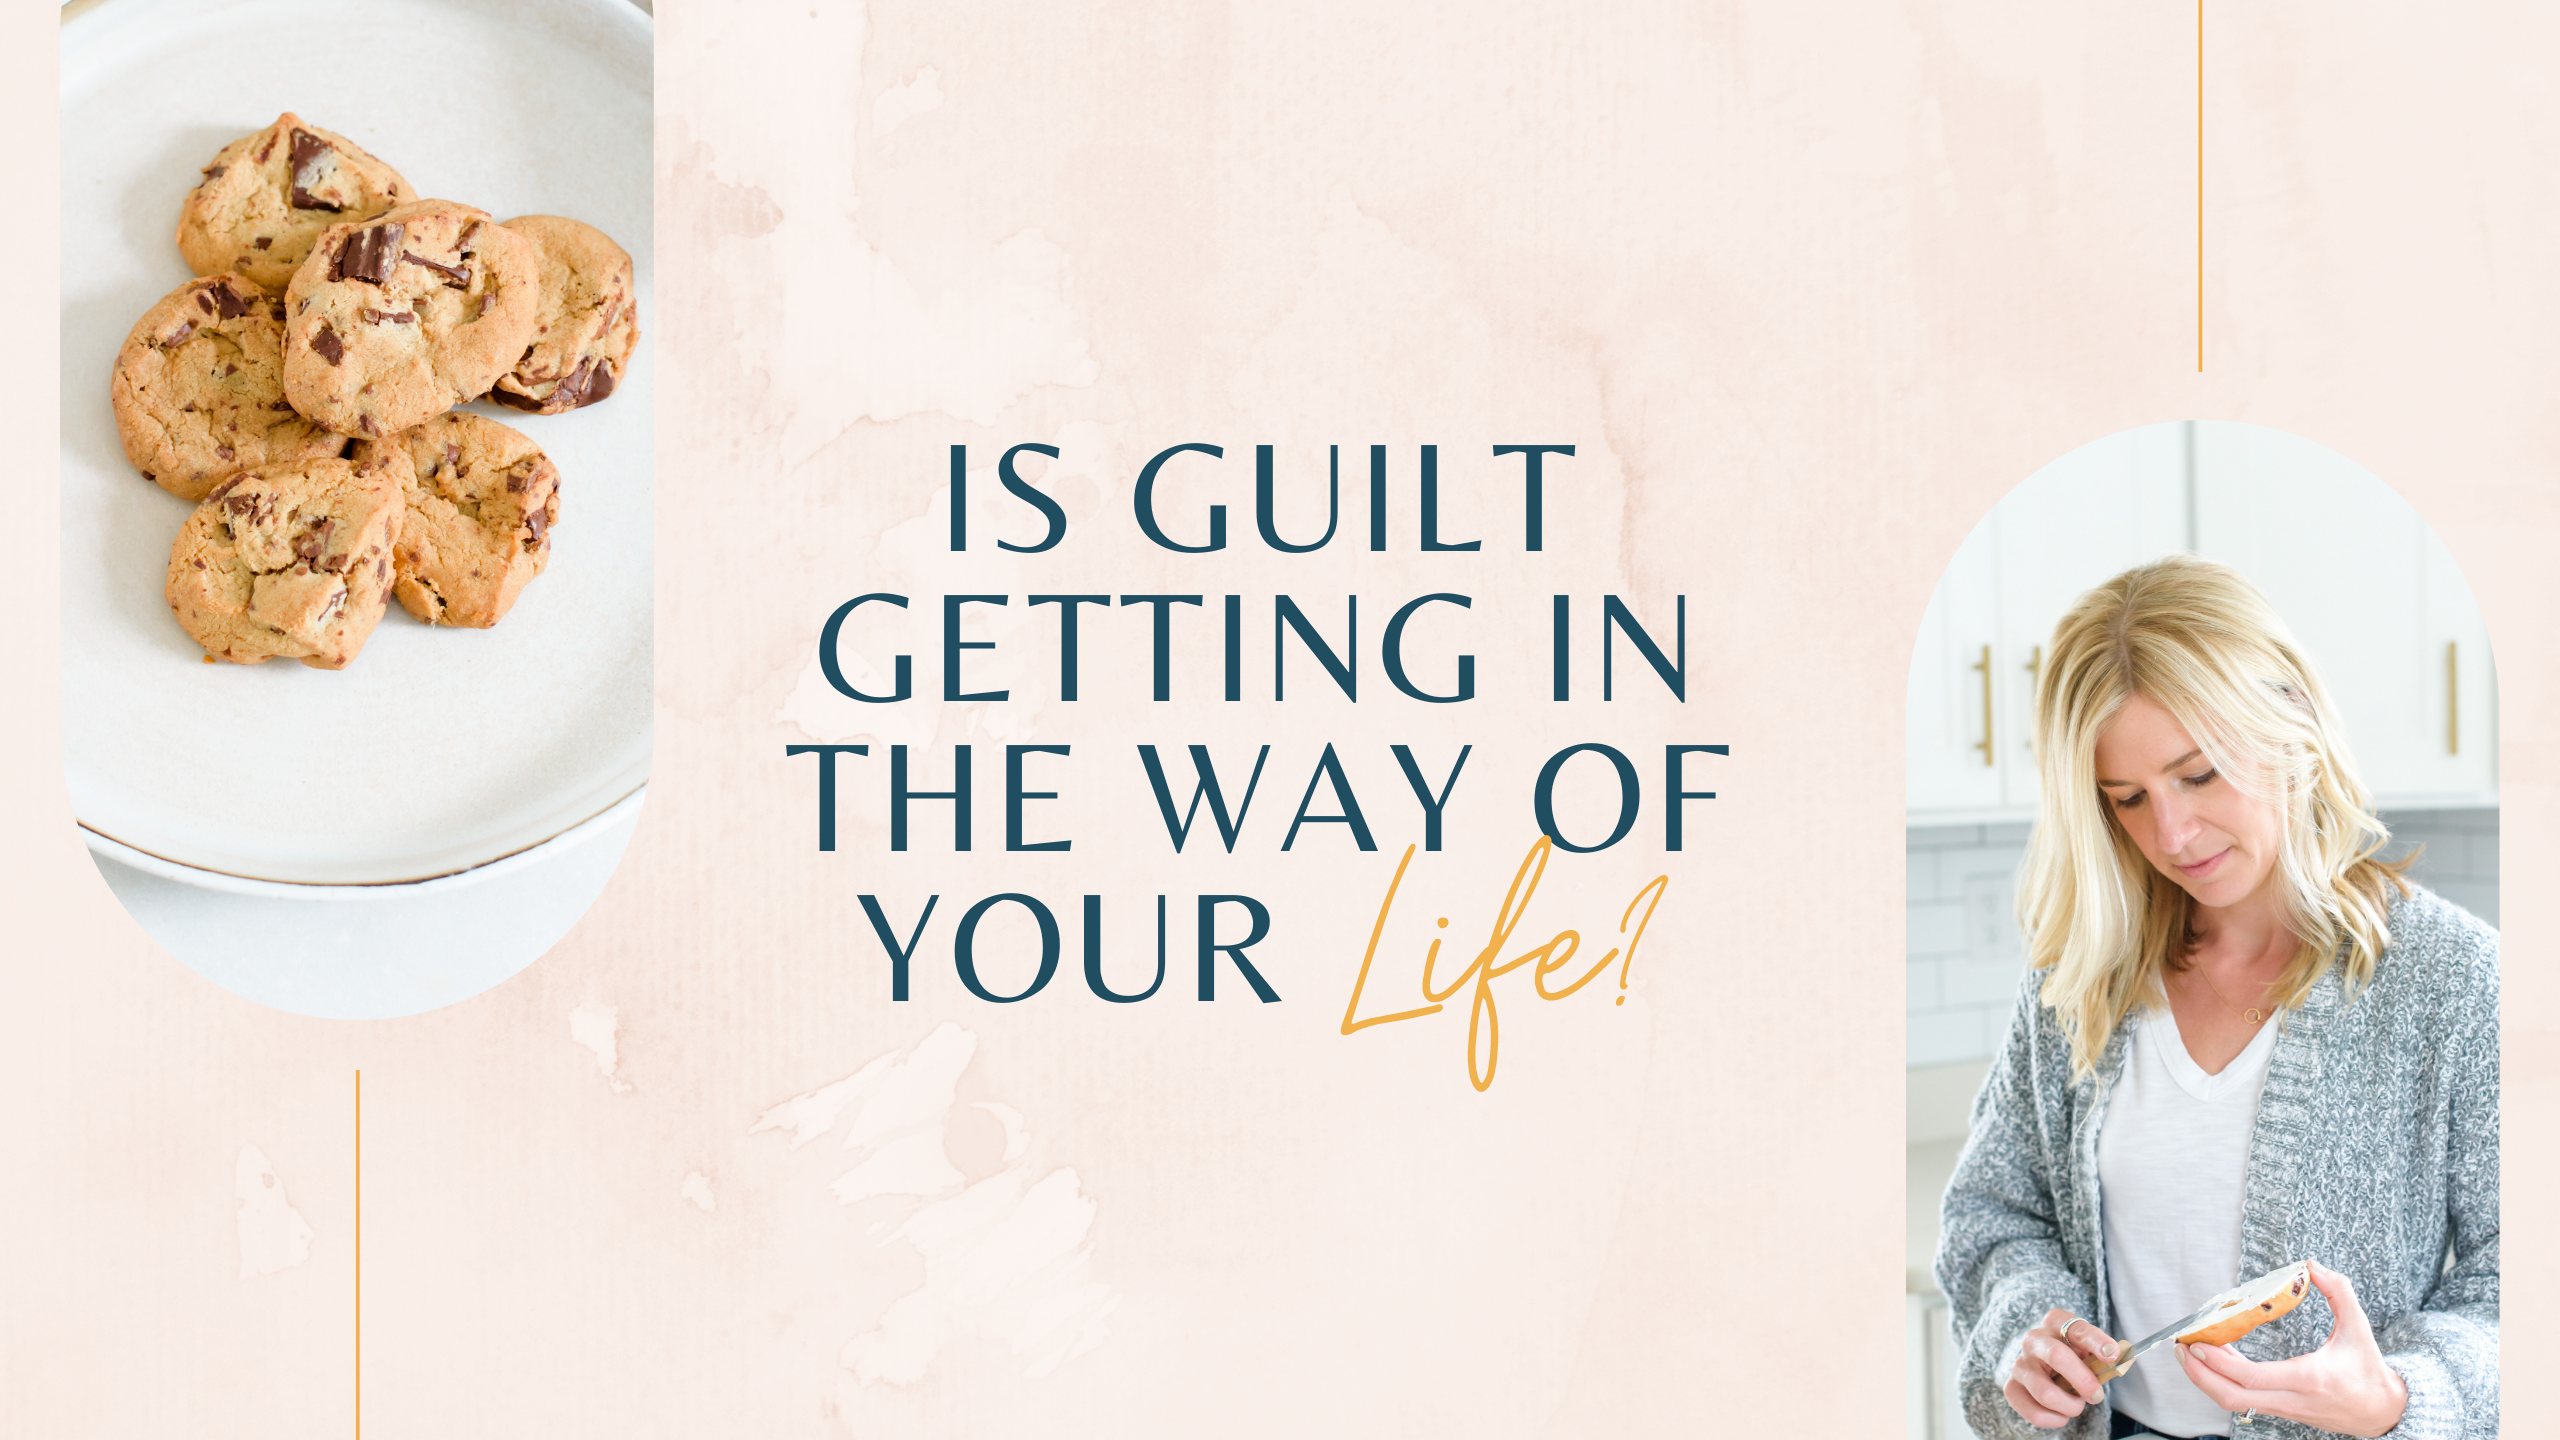 Guilt Free Eating, Guilt Free Lifestyle, Intuitive Eating, Intuitive Living